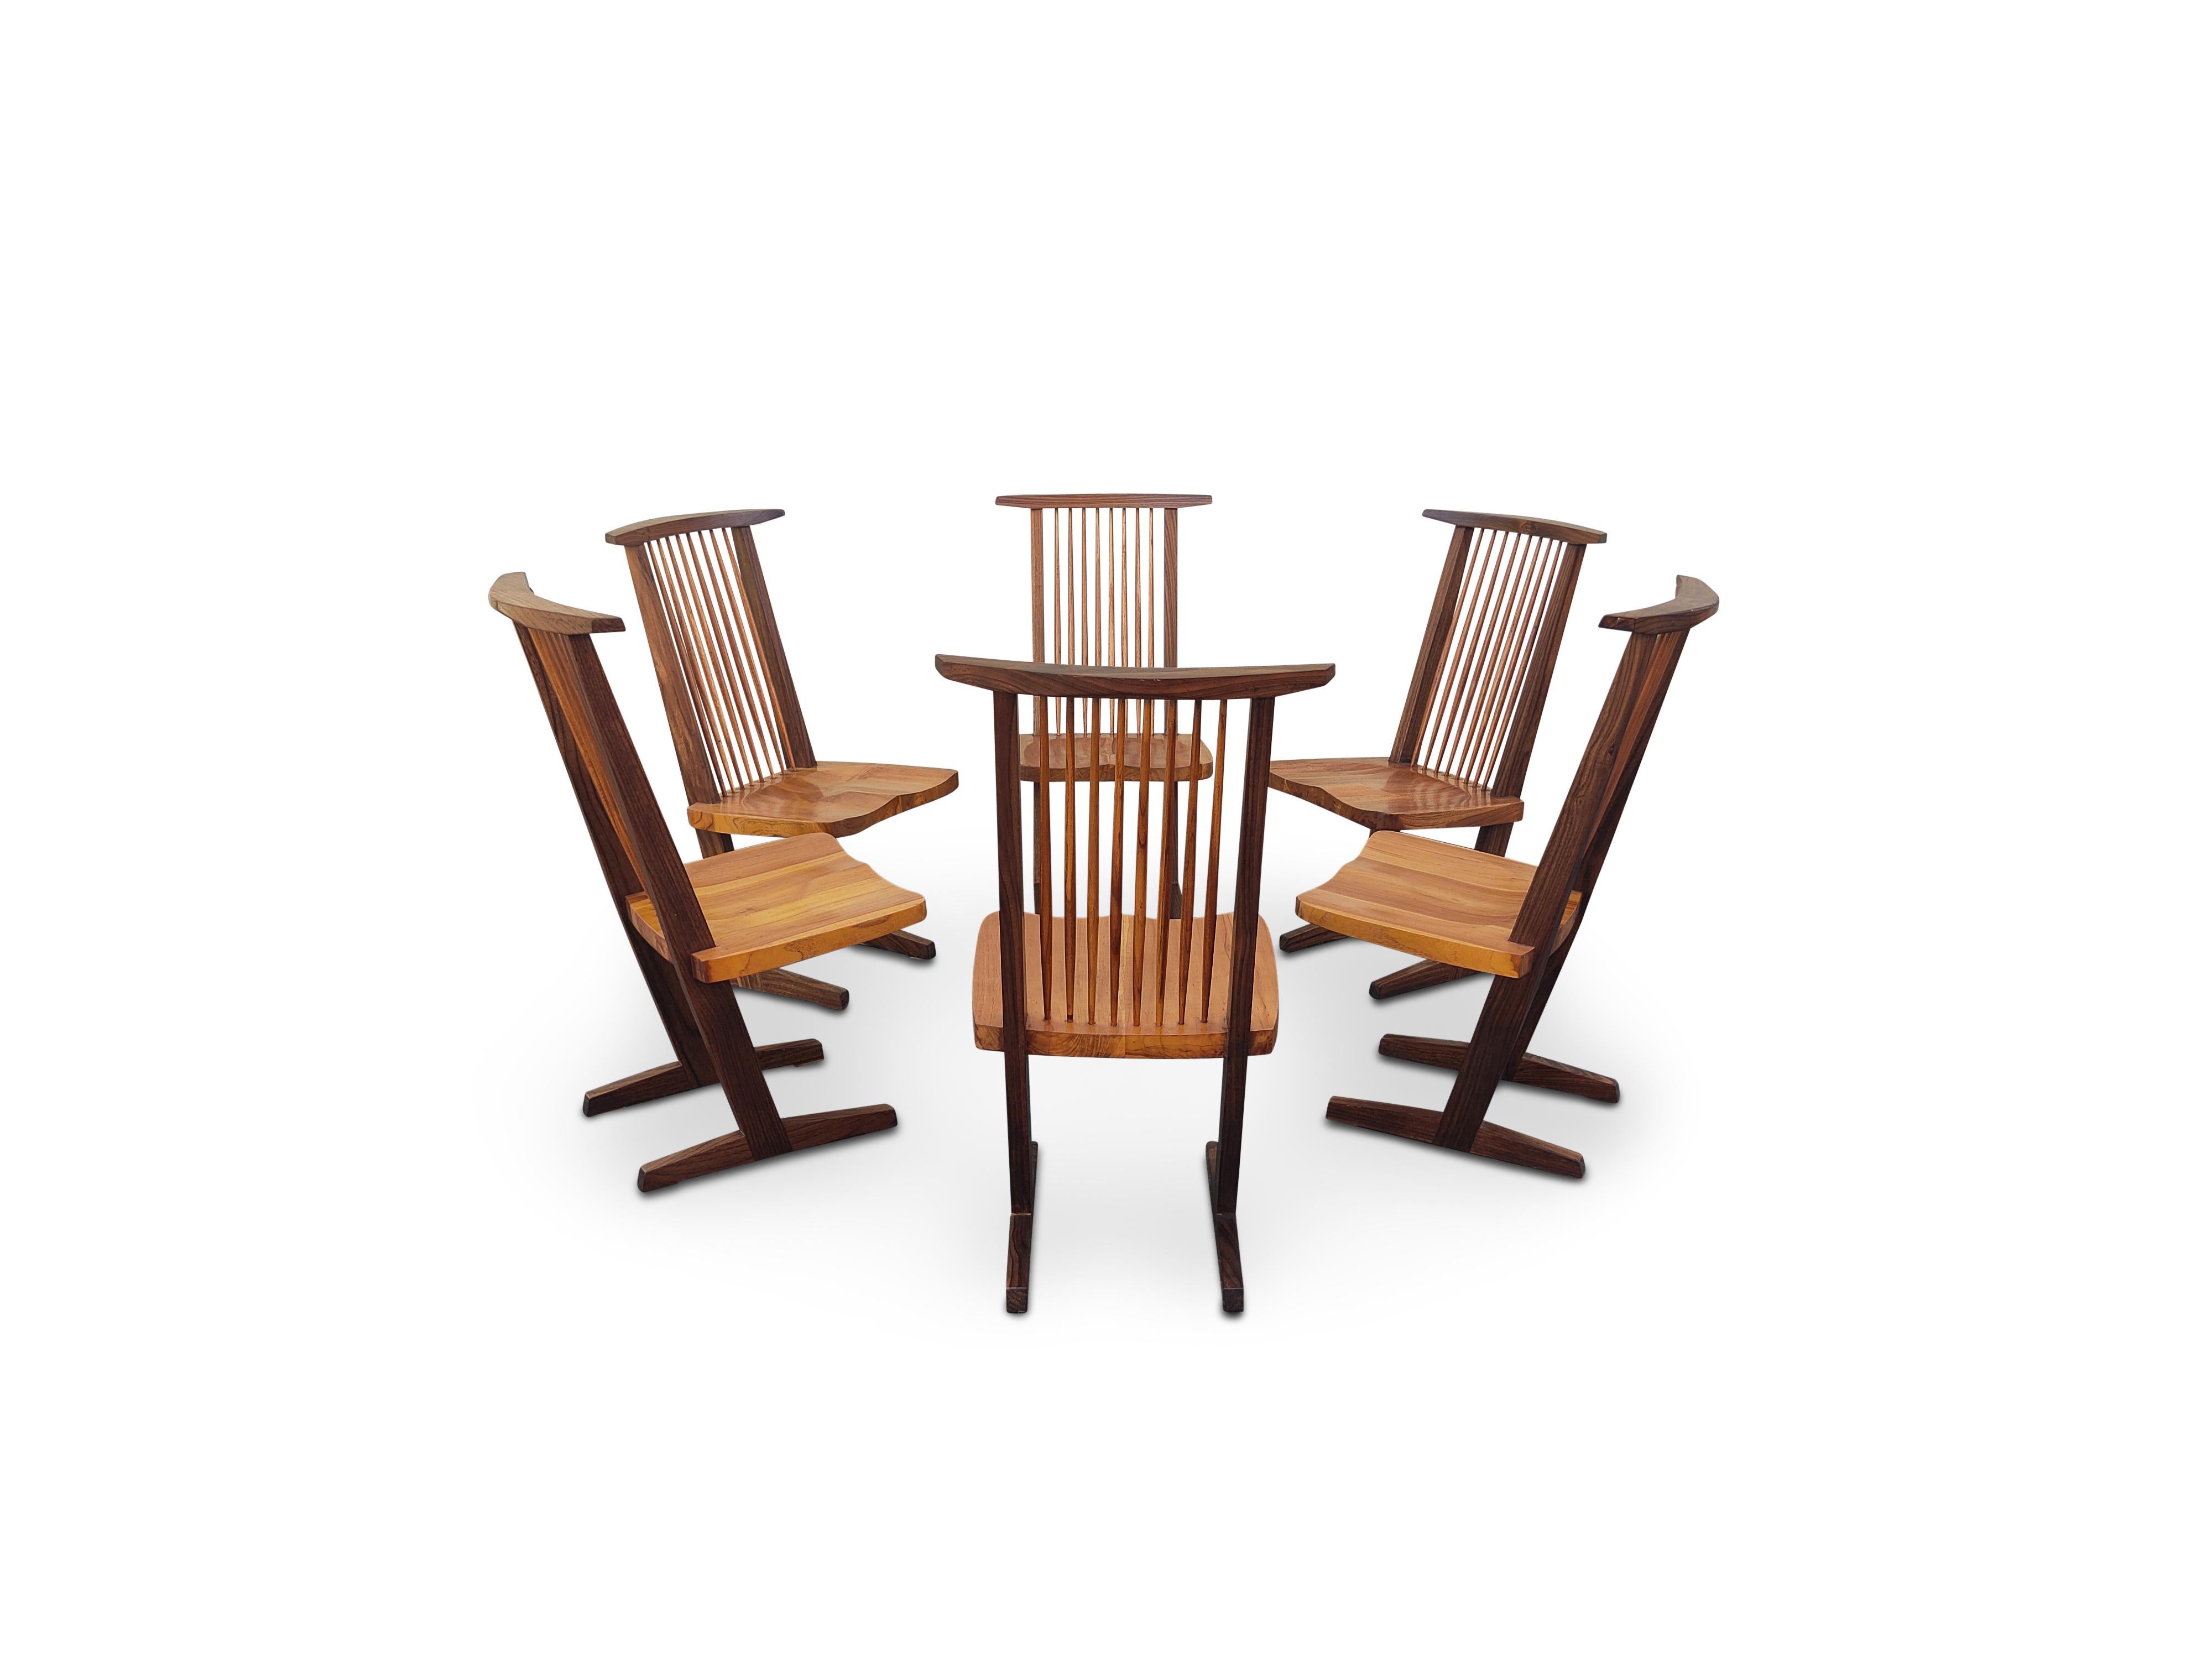 For your consideration, a wonderful set of six, George Nakashima Inspired, Conoid Style dining chairs, likely from the late 70s or early 80s. These chairs are made with mixed hardwoods that have dramatic grain, and a warm patina. They are expertly